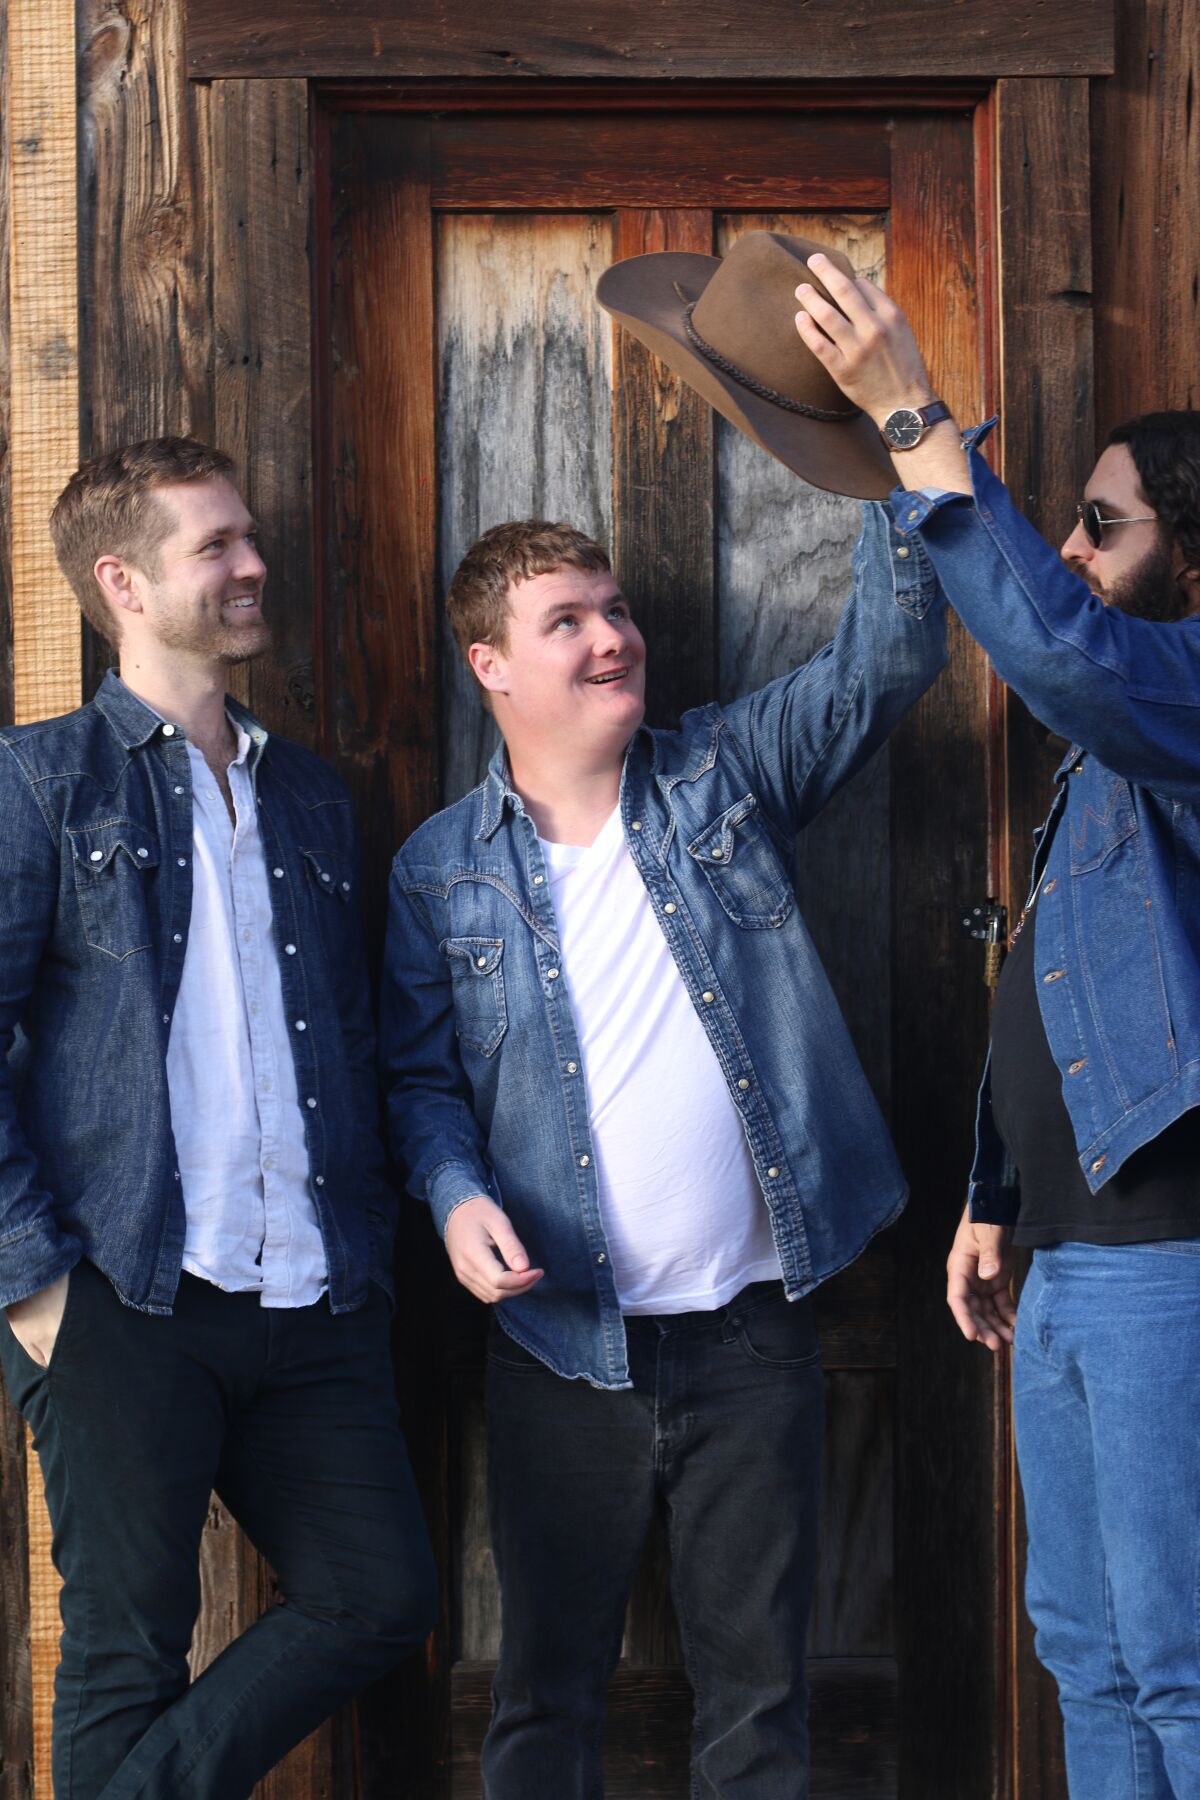 Heath Farmer, Reid Moriarty and Steven Crowle of Jungle Poppins released "Slightly Country."